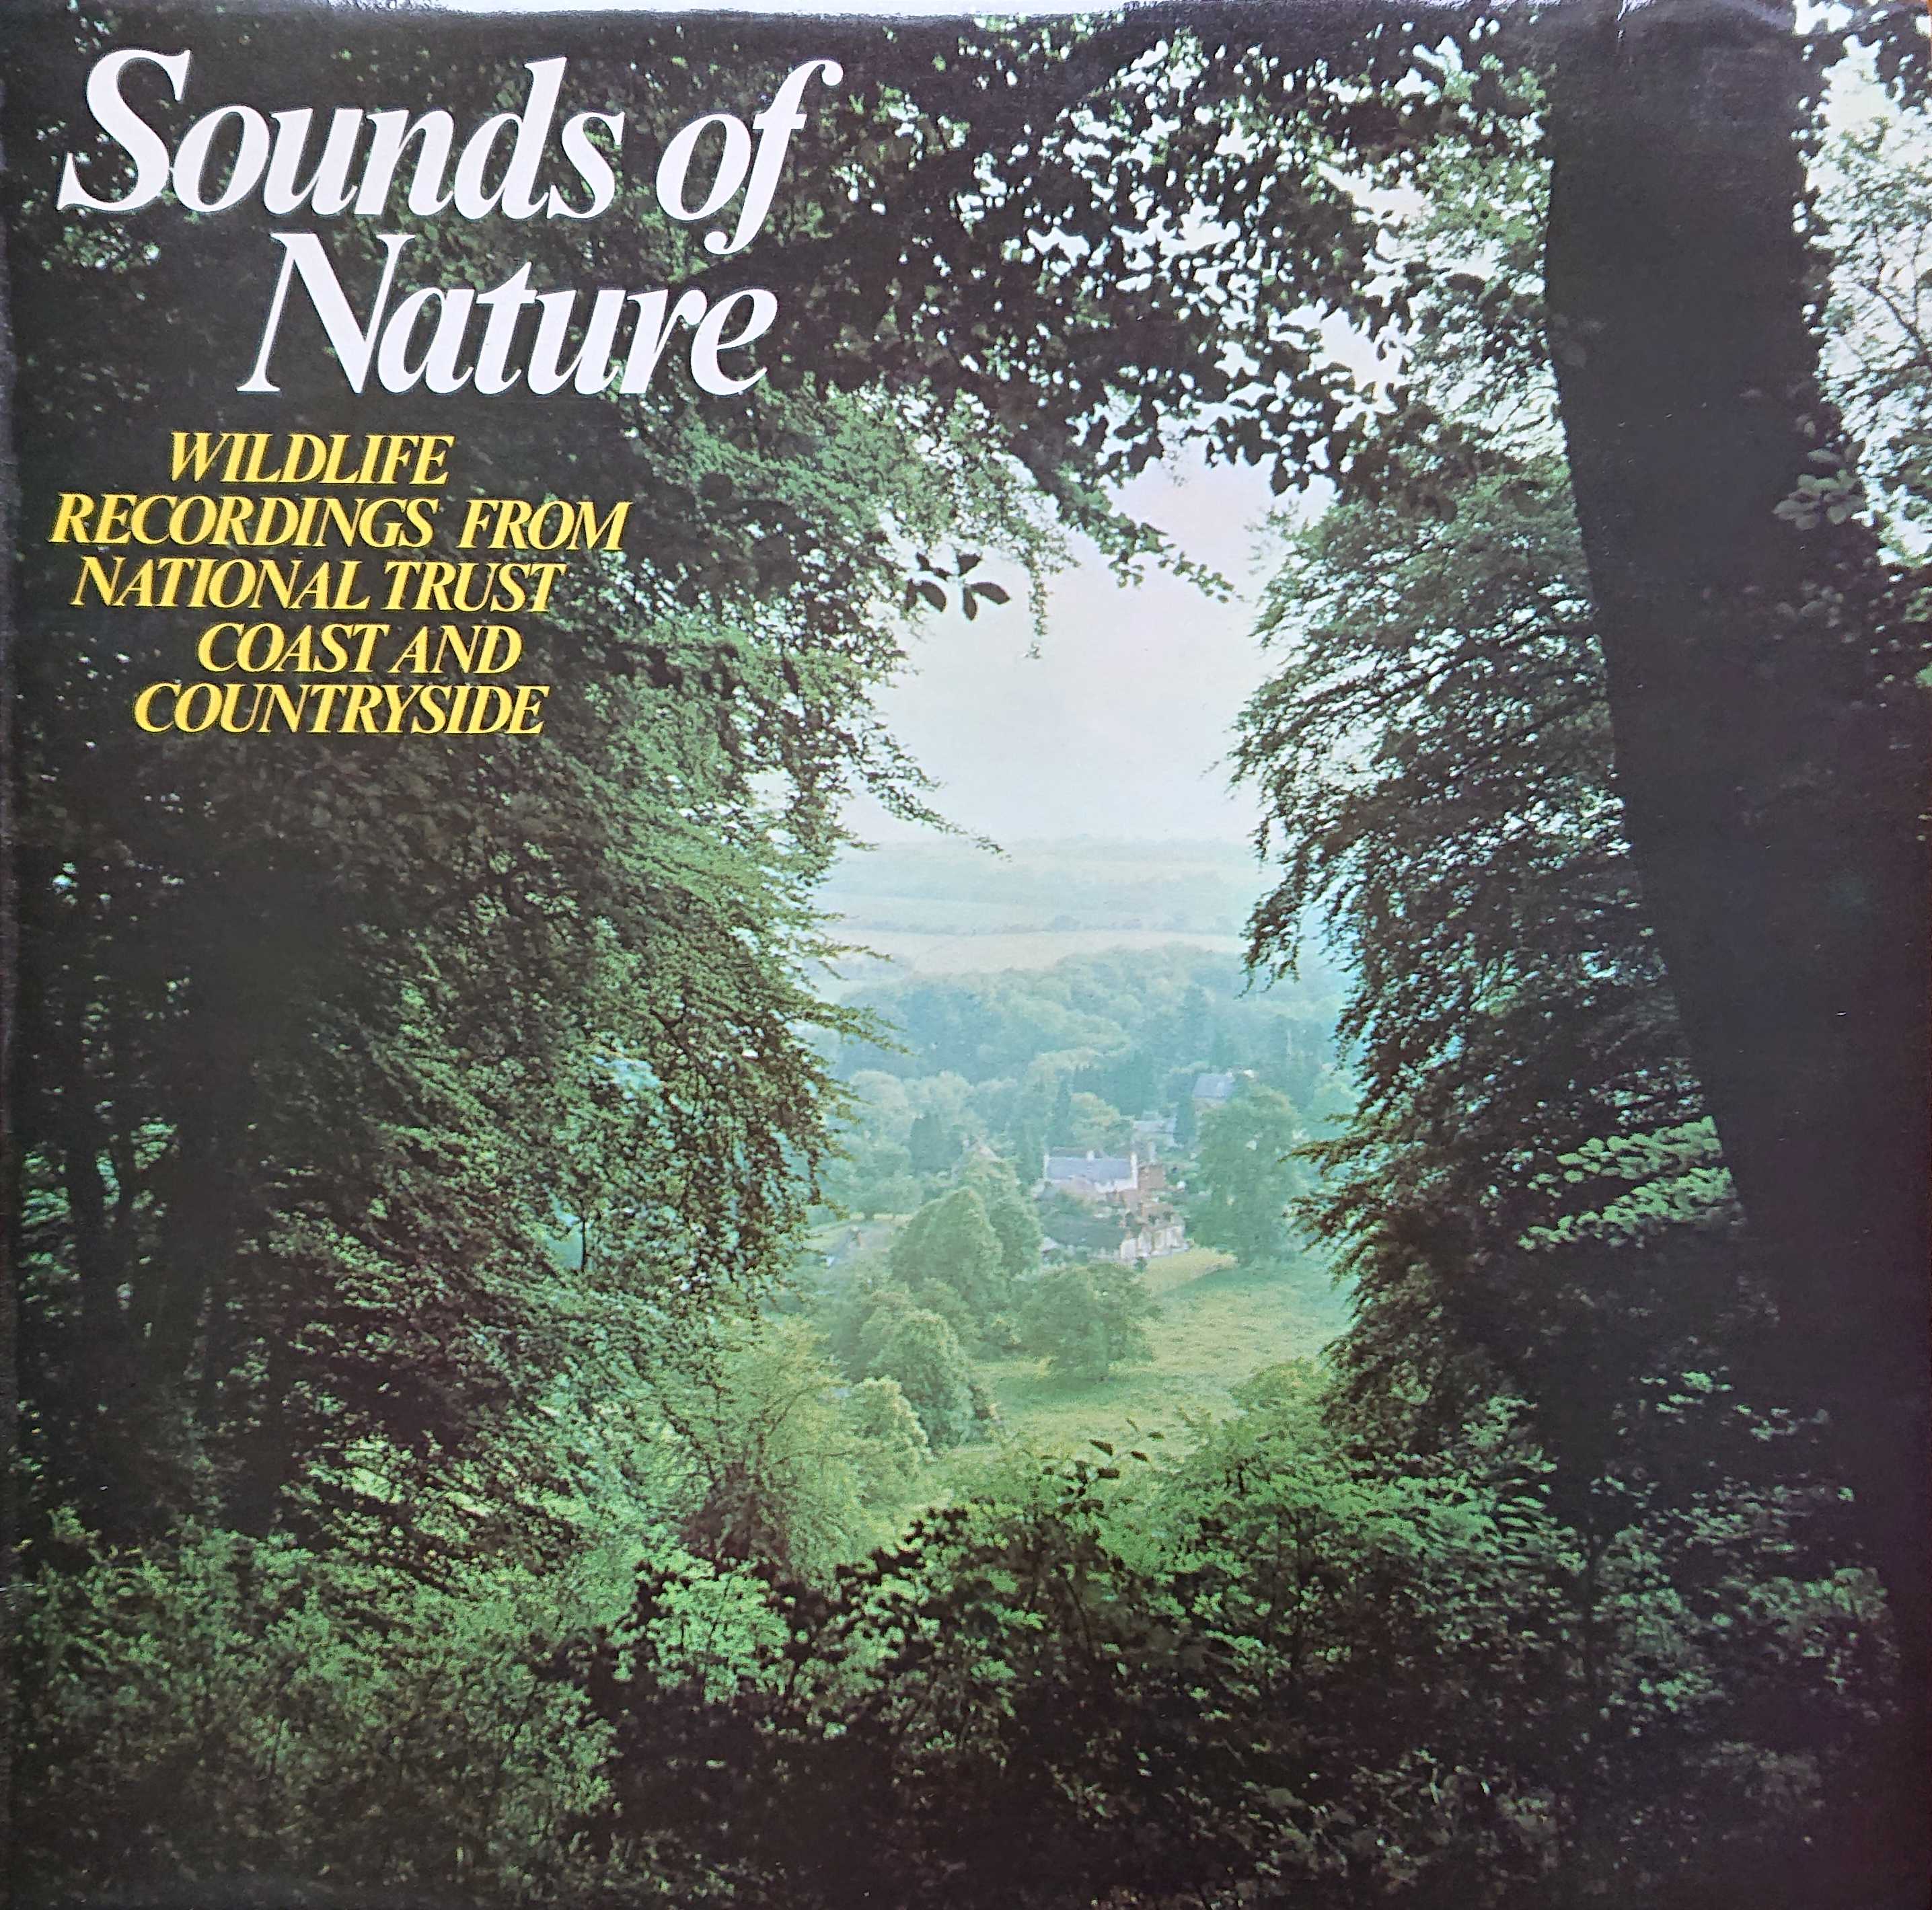 Picture of NT 001 Sounds of nature by artist Eric Simms from the BBC records and Tapes library